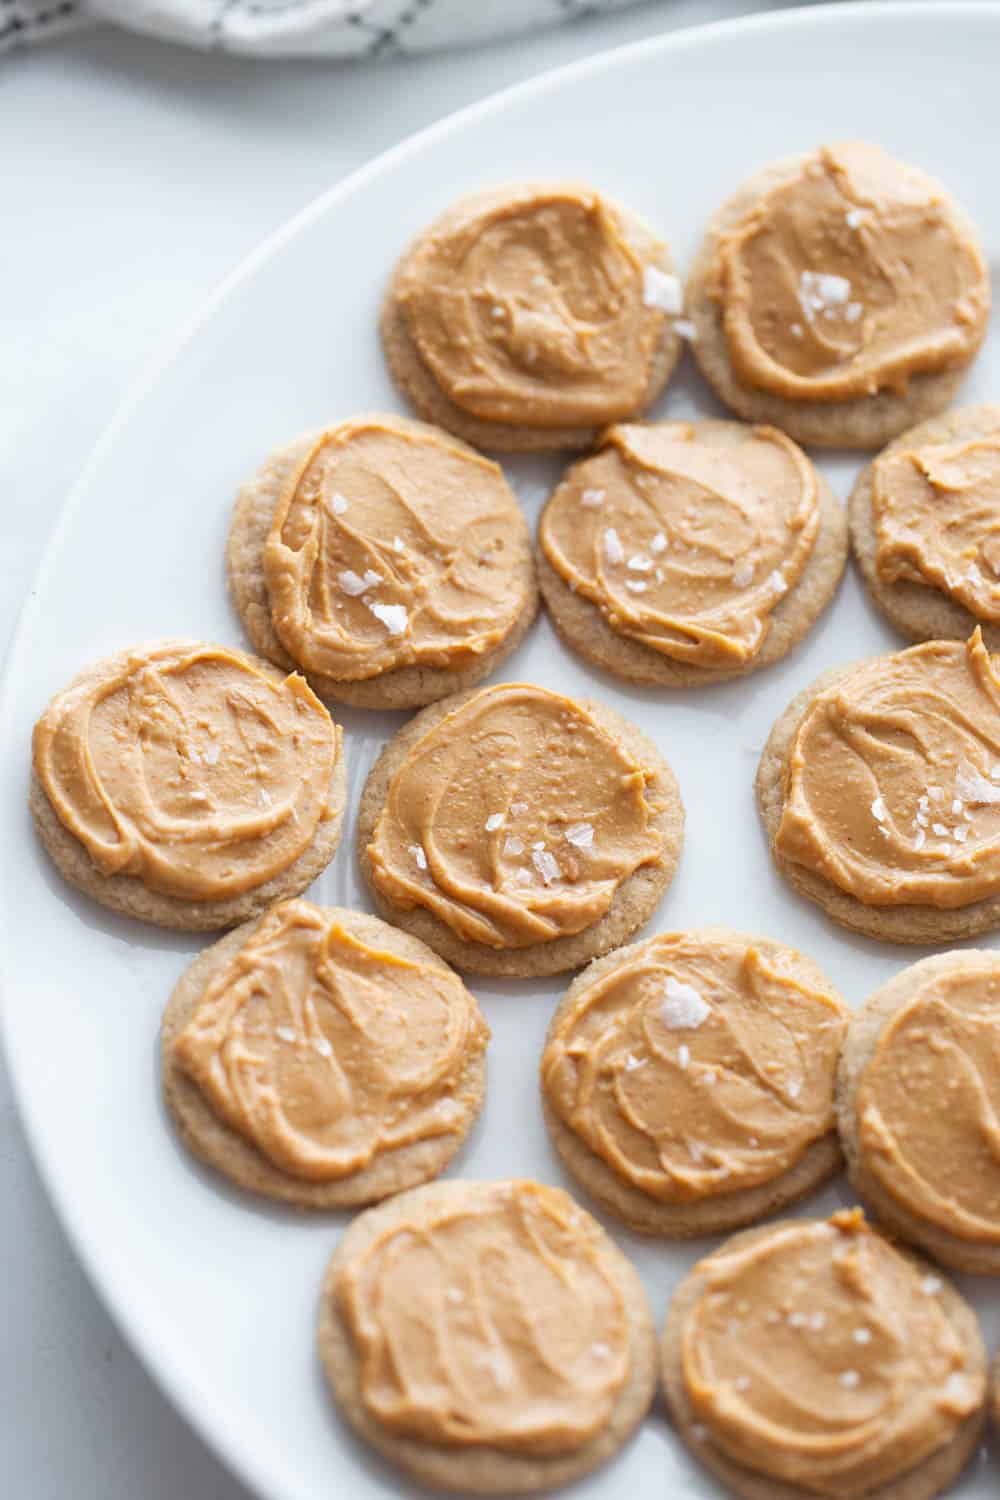 Small shortbread cookies with peanut butter and flakey salt on top.